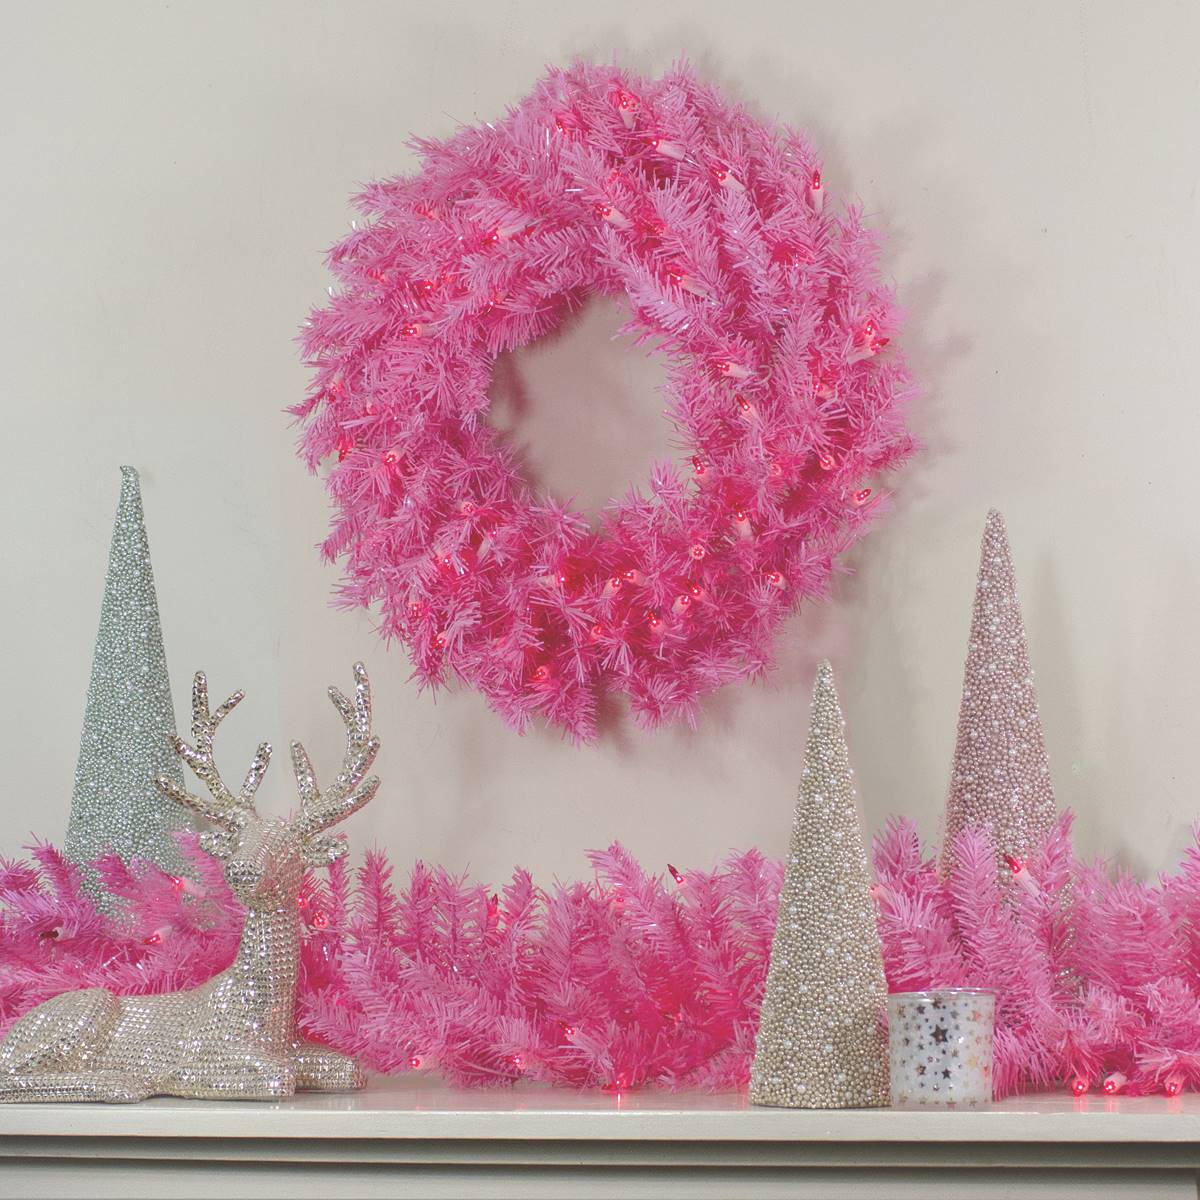 Northlight Seasonal 36in. Pink Spruce Artificial Christmas Wreath